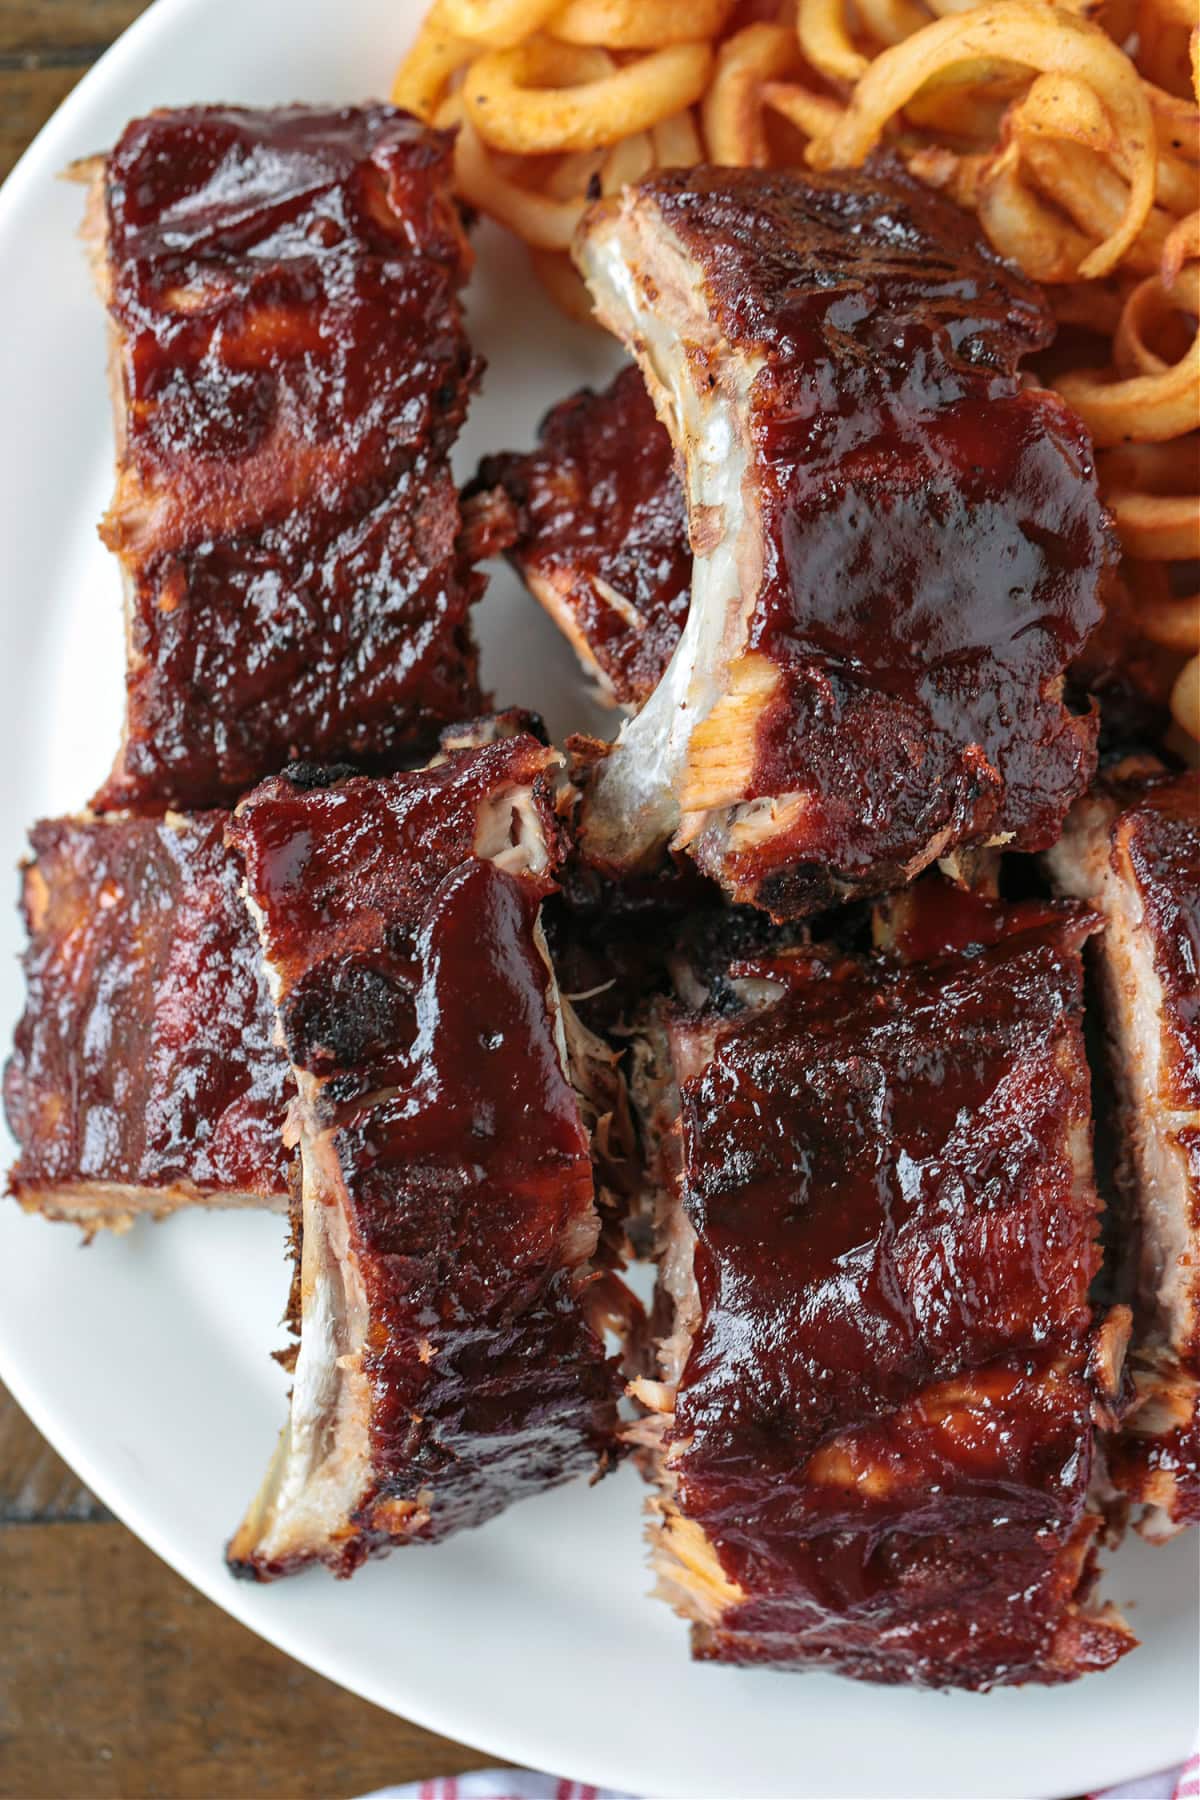 bbq ribs on a plate with french fries